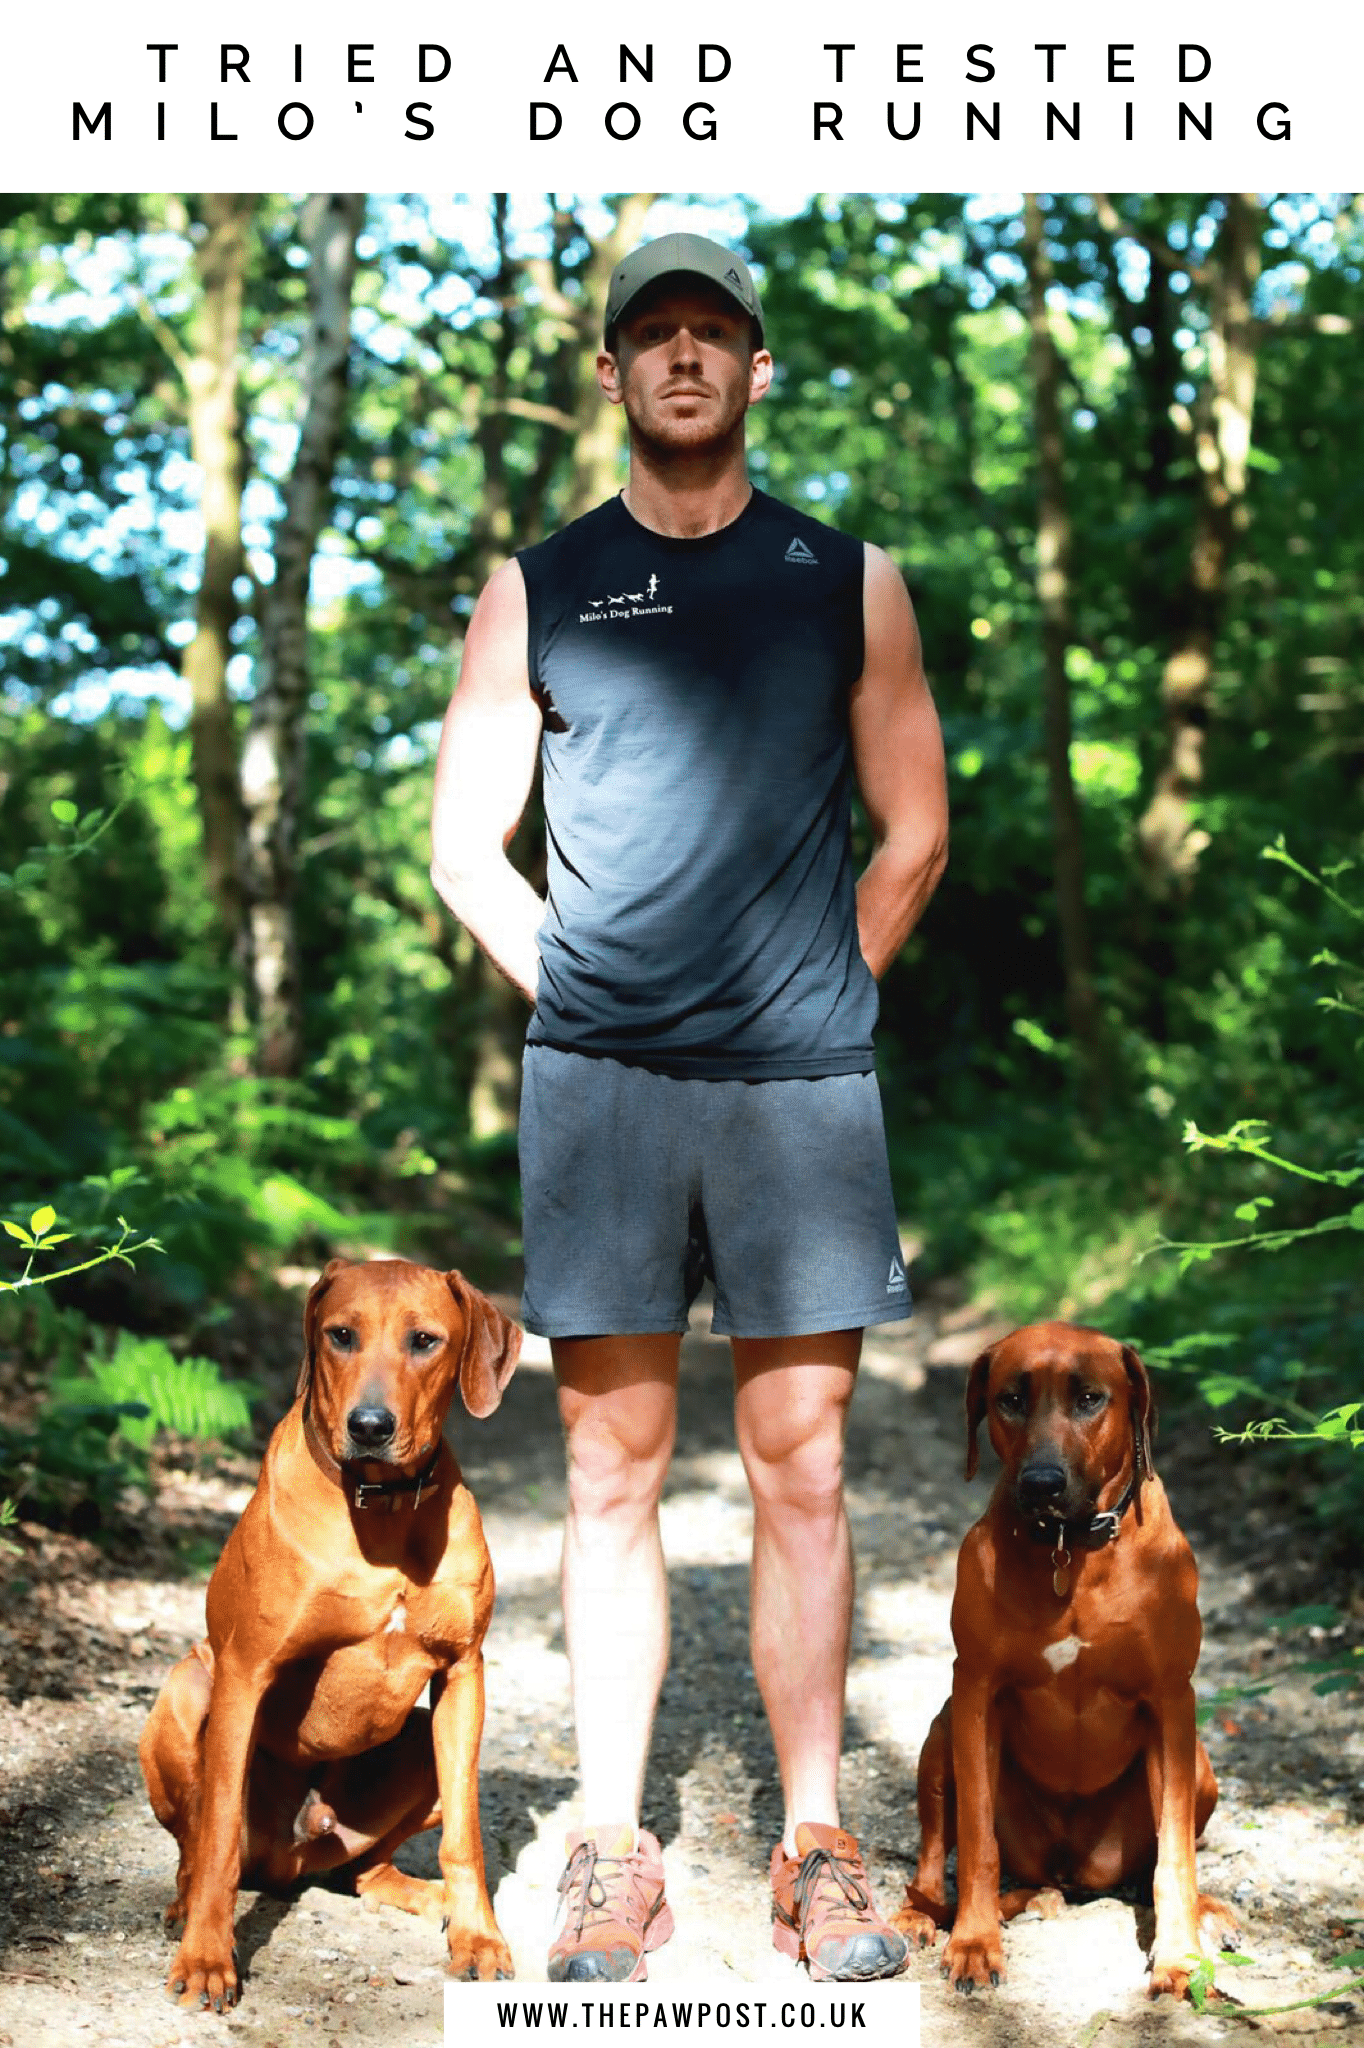 Milo Royds of Milo's Dog Running shares how his love of running and dogs led to his dream job!